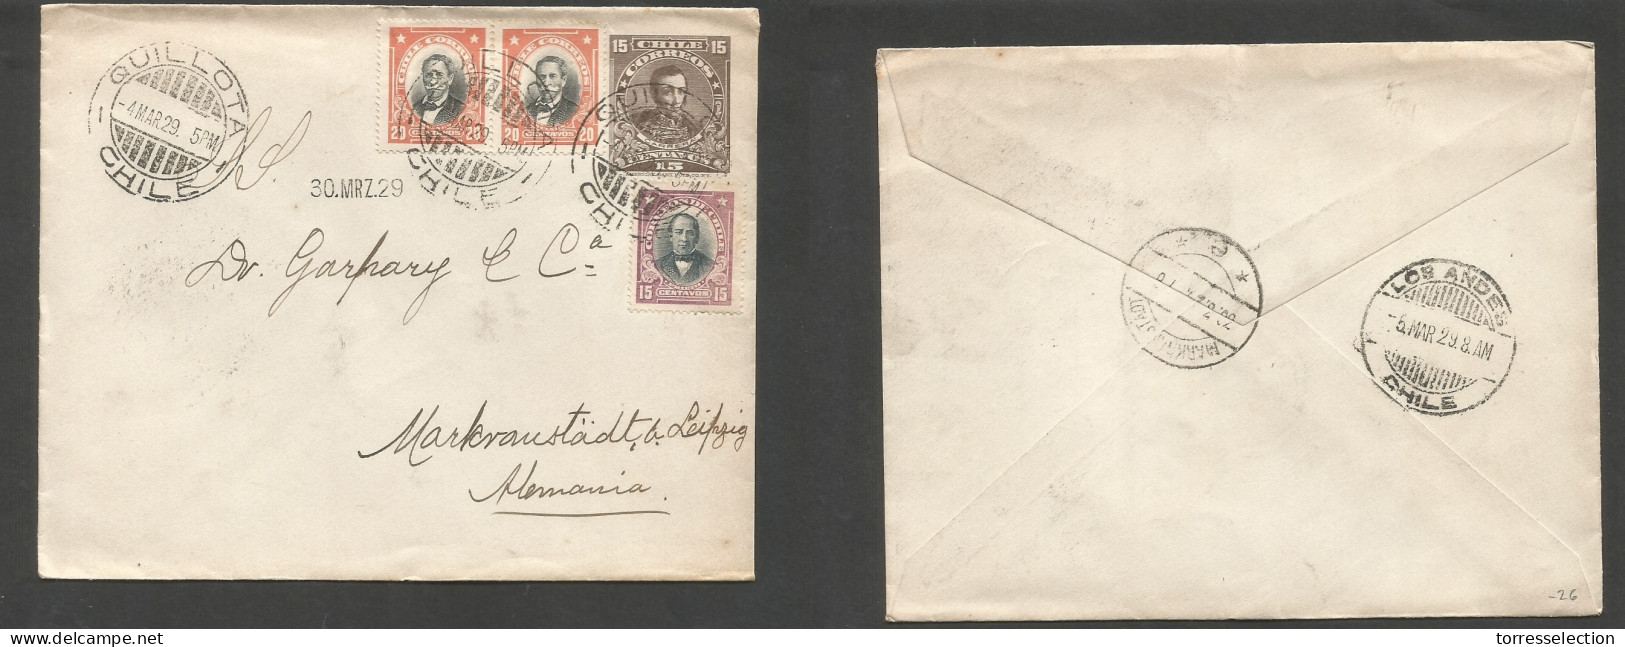 CHILE - Stationery. 1929 (4 March) Quillota - Germany, Mankvanstadt (30 March) 15c Brown + 3 Adtls Stat Env, Cds At 70c  - Chili